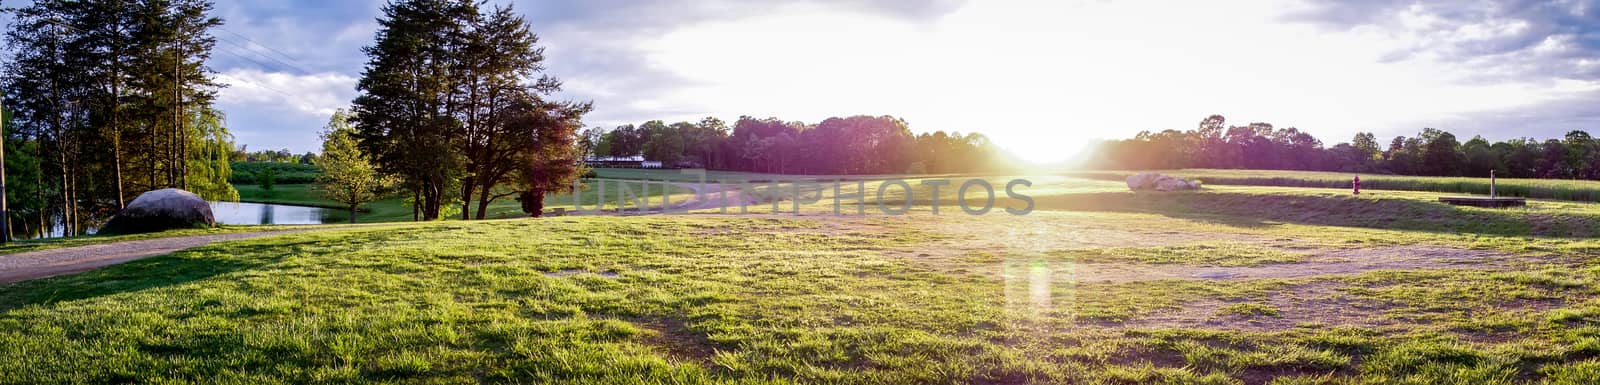 Sunset over green farm field  by digidreamgrafix